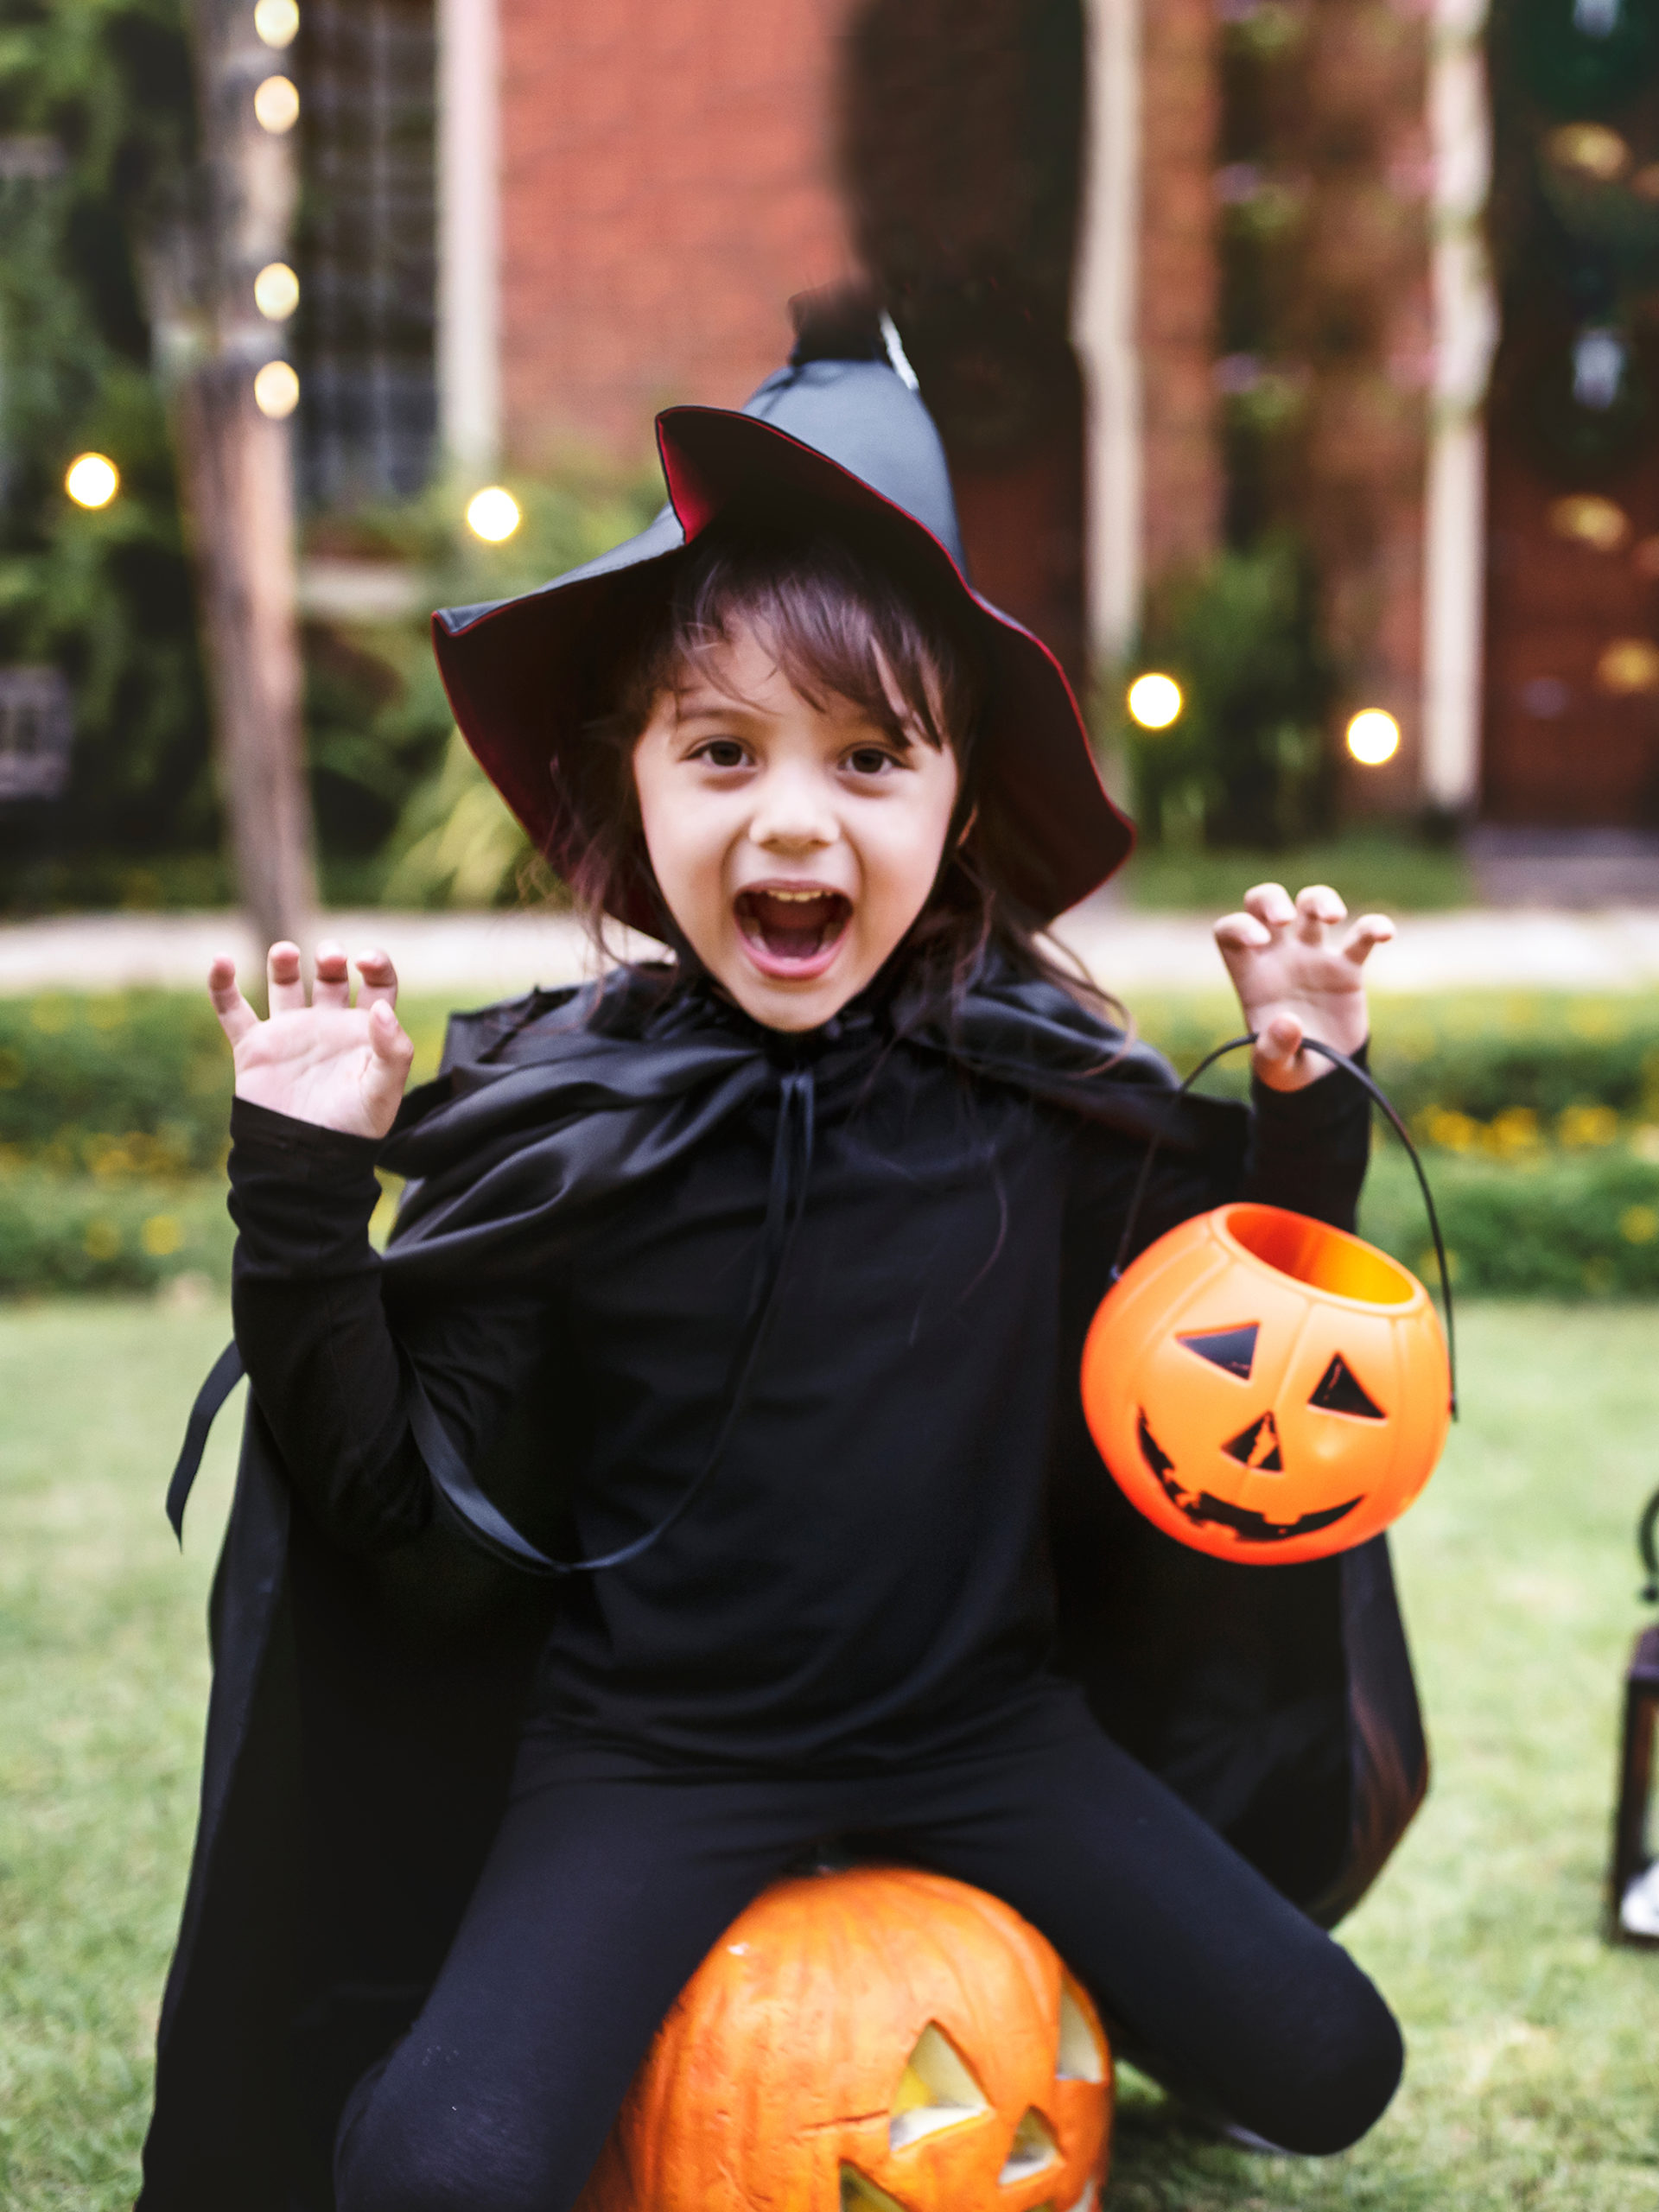 Girl dressed as a witch celebrates Halloween